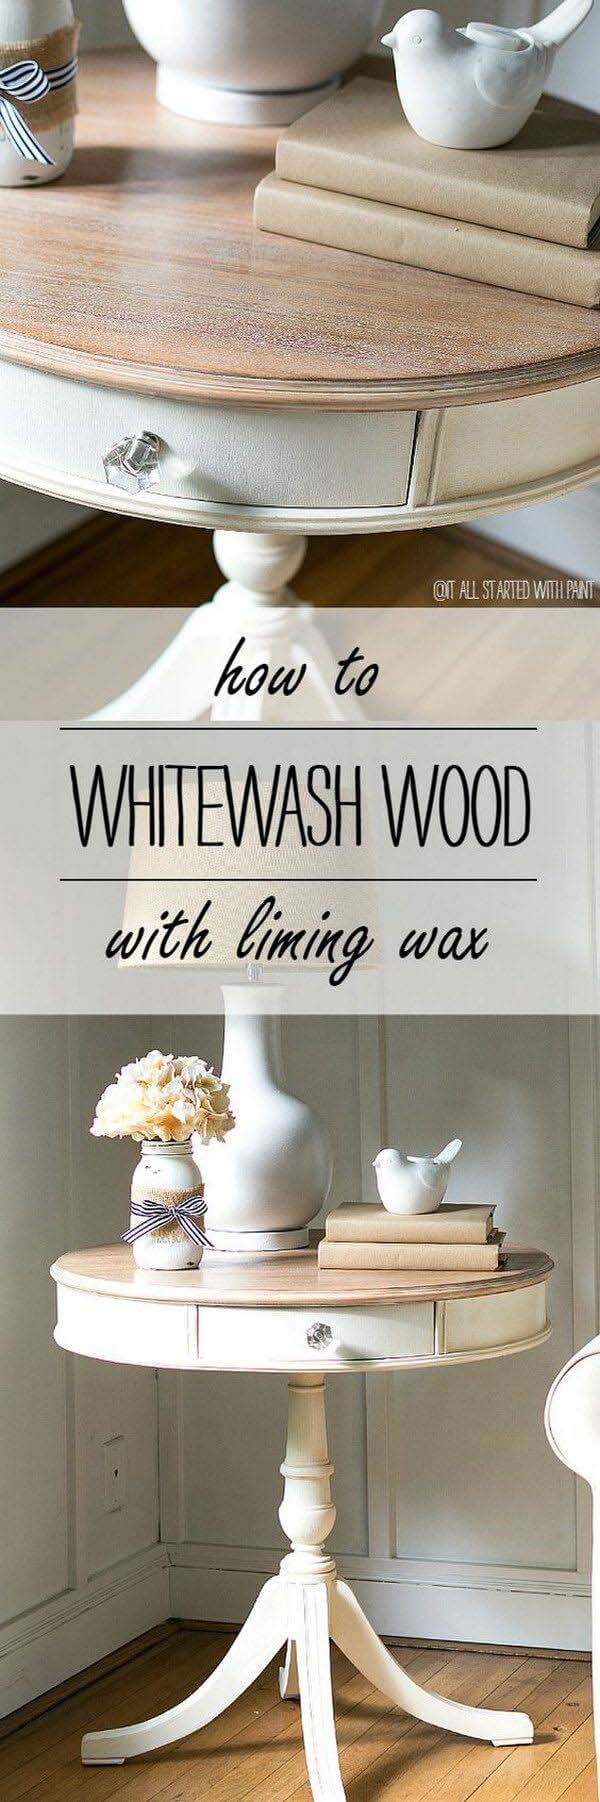 Whitewash Wood With Liming Wax